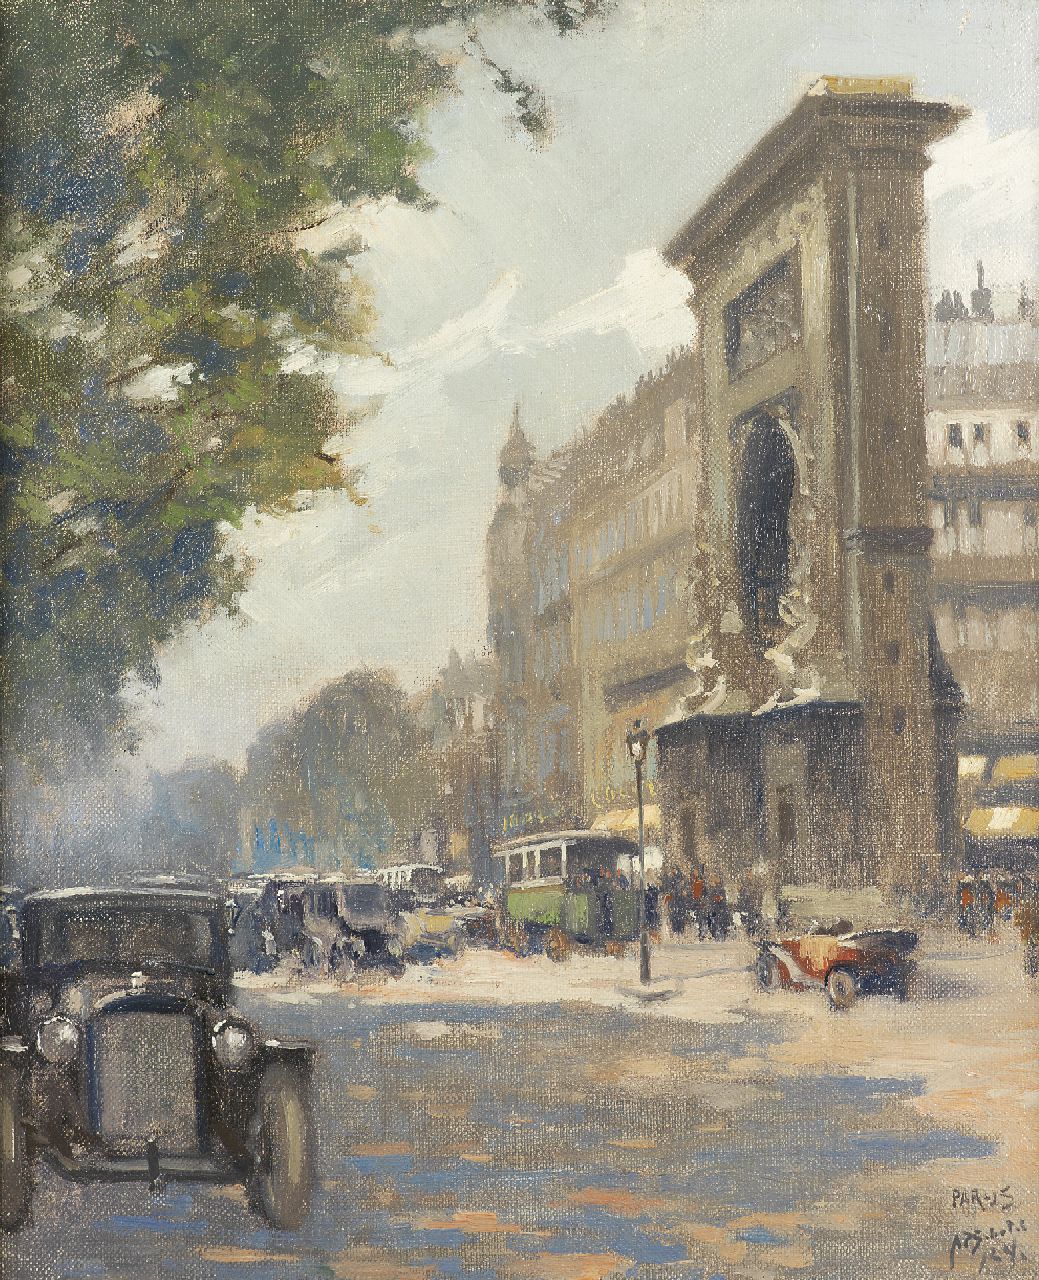 Schotel A.P.  | Anthonie Pieter Schotel | Paintings offered for sale | Porte Saint-Denis in Paris, oil on canvas 57.0 x 47.0 cm, signed l.r. and dated '24